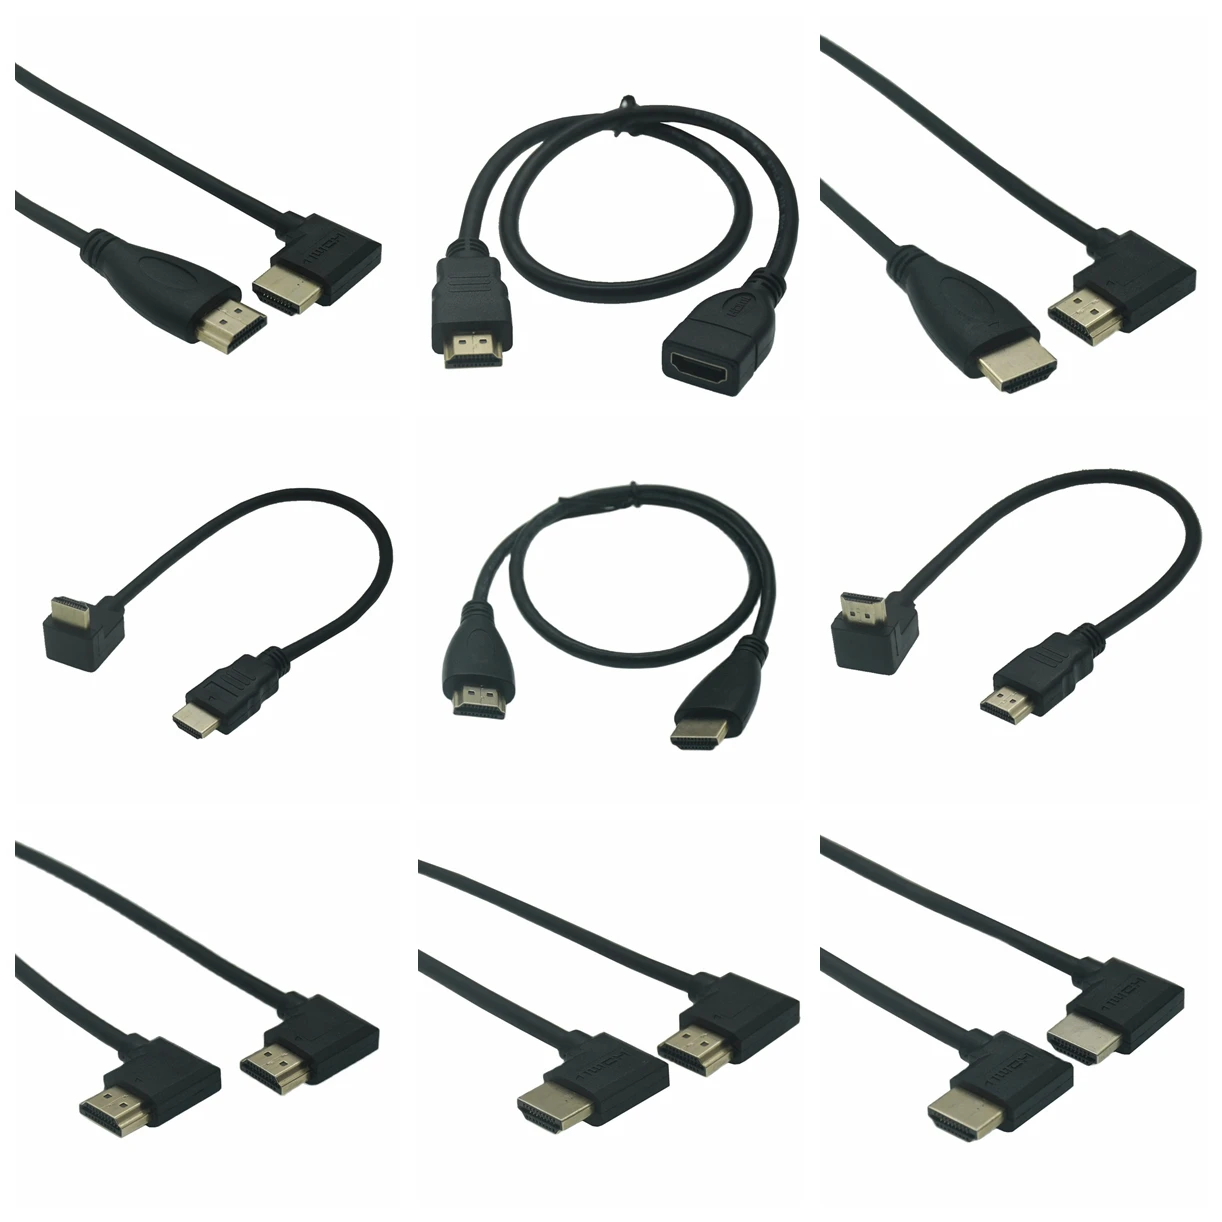 

15cm 30cm 50CM 1m Dual HDM1-compatible Male to Female Converter Up Down Right Left Angled Adapter HDTV Cable for DVD PS3 PC